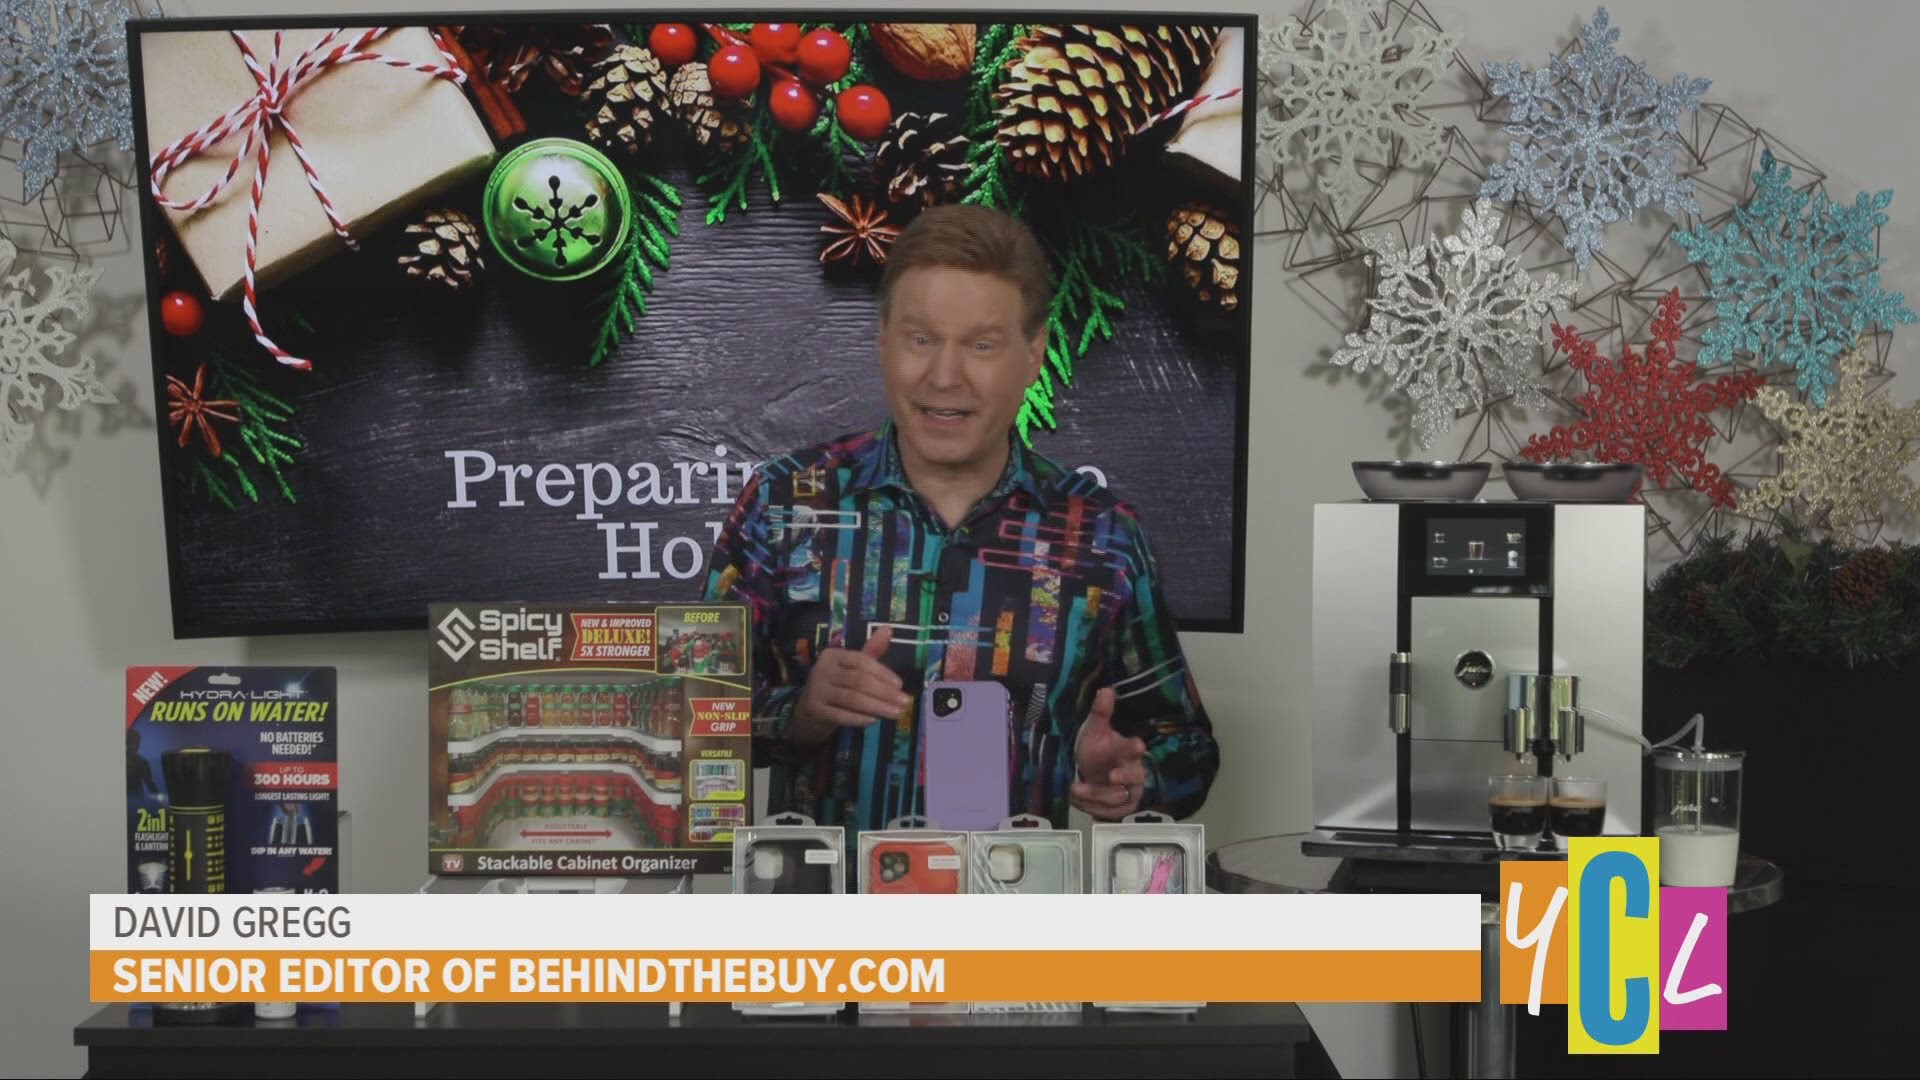 BehindTheBuy.com’s David Gregg joins us with some great holiday gift ideas! The following is a paid segment sponsored by Consumer Product Newsgroup